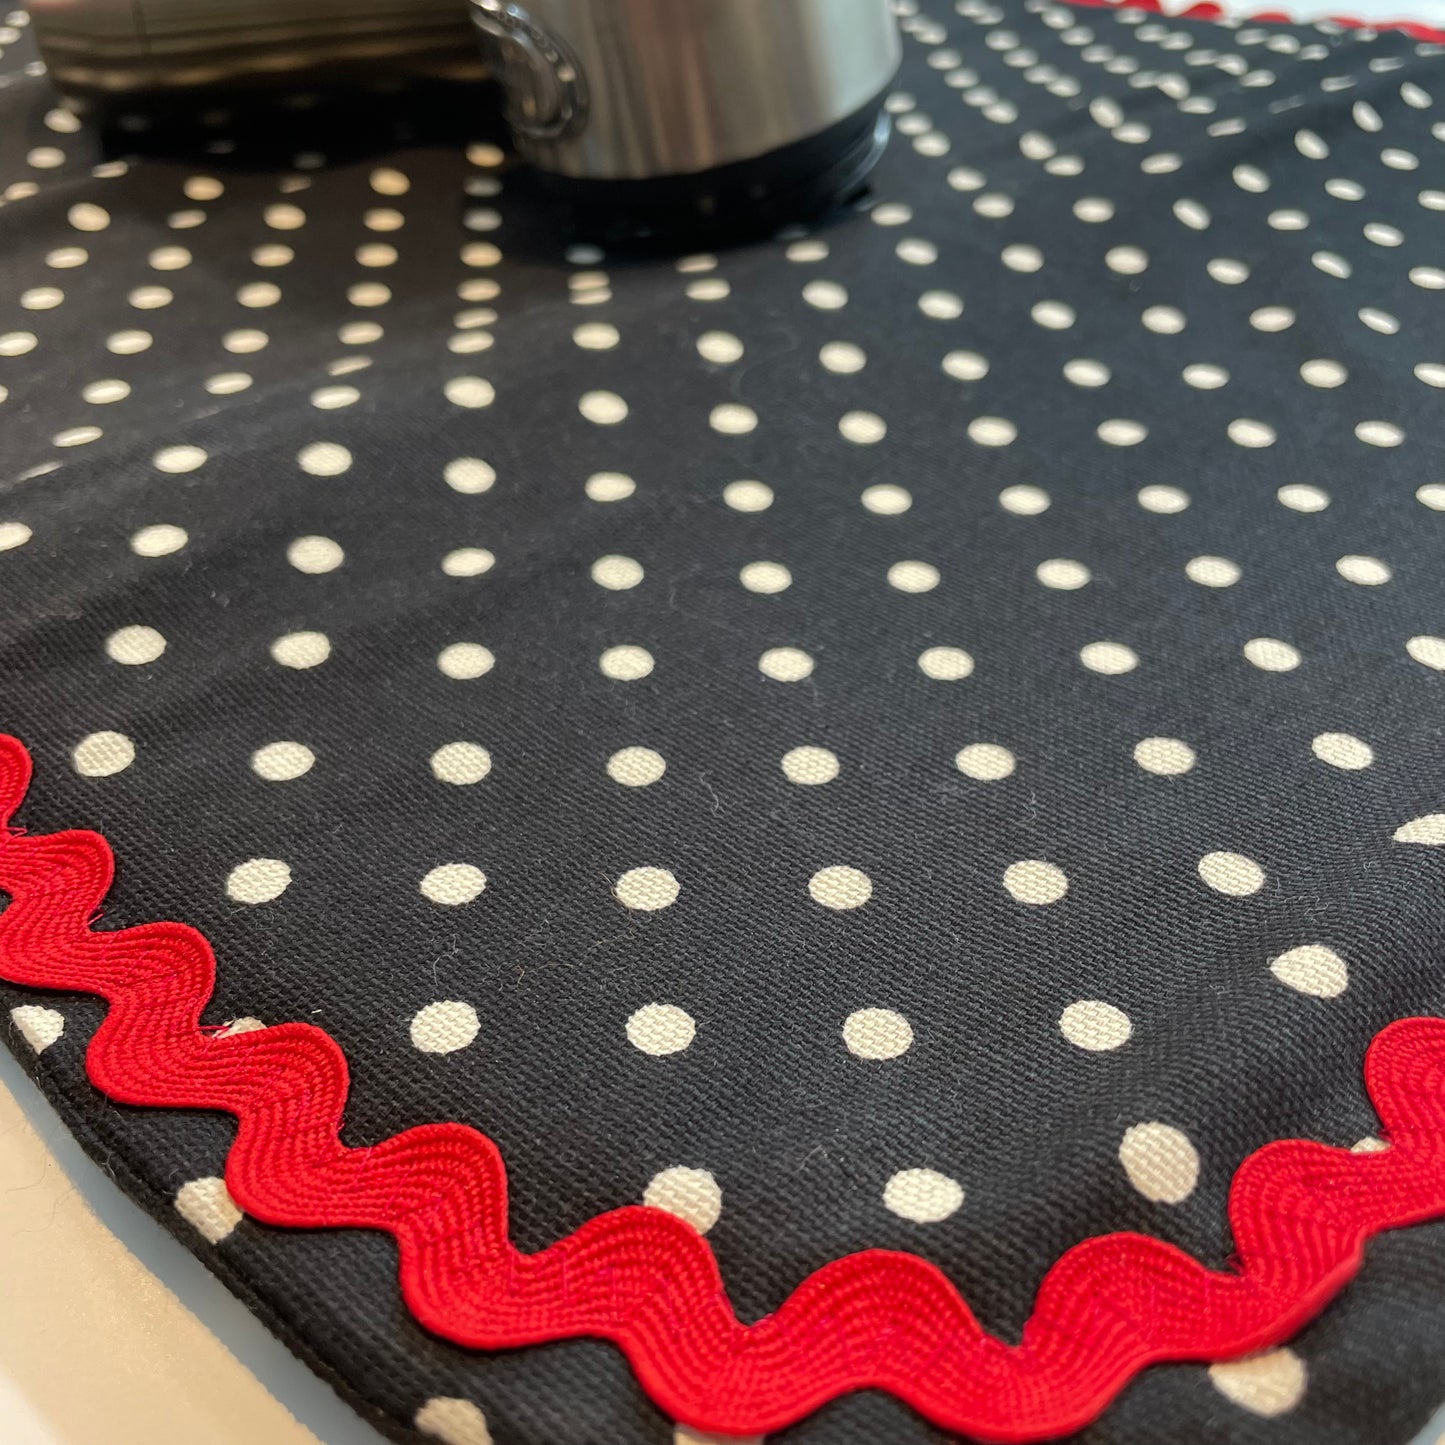 Retro Black and White Polka Dot Dish Drying Mat with Red and white trim and a black accent button. Vintage style kitchen decor for 21st century. Part of a mix and match collection so be sure to check out all the coordinating products. Handcrafted in Canada. Find out more on the Home Stitchery Decor YouTube Channel